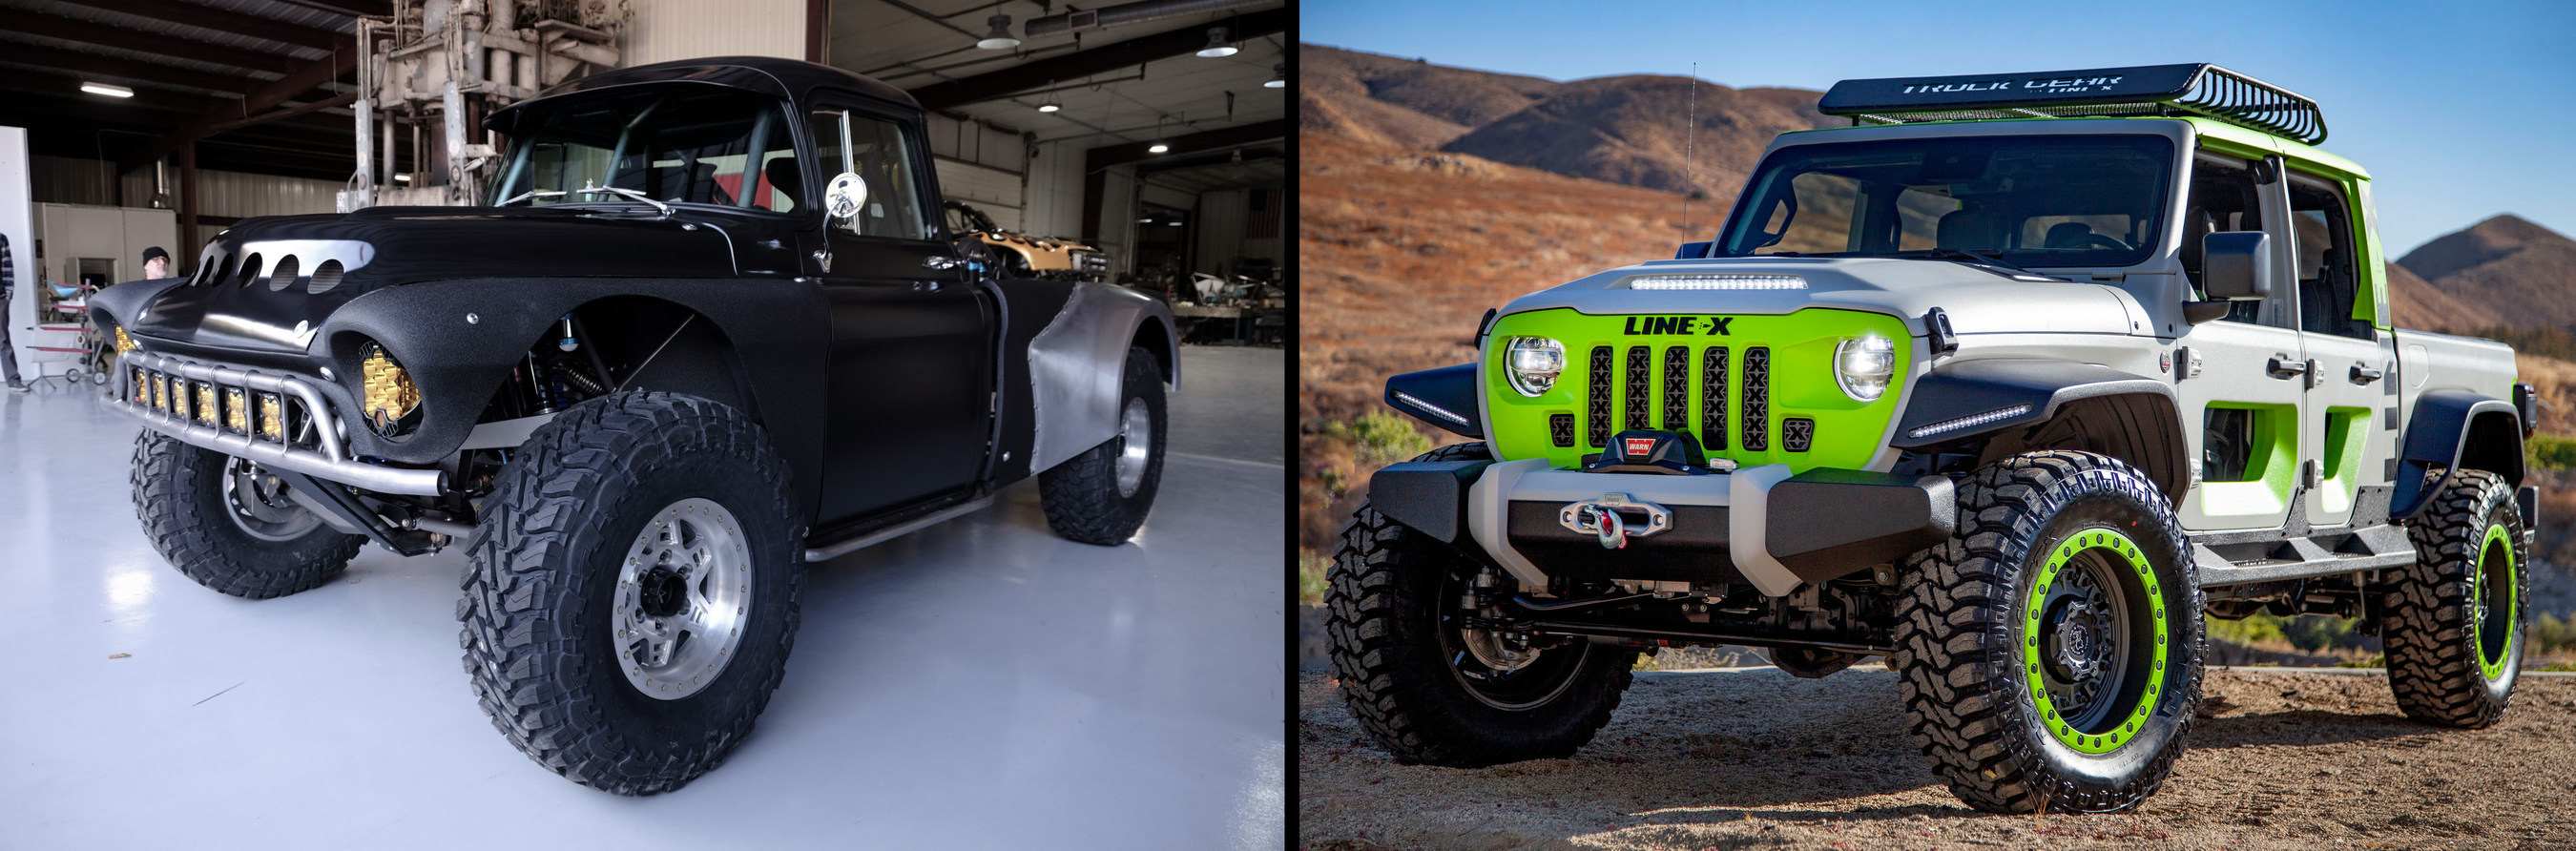 LINE-X Teams Up With Two Legendary Builders For 2019 SEMA Show -Fabrication Icons Jesse James And Kenny Pfitzer Create Off Road Classics For World's Largest Automotive Aftermarket Show